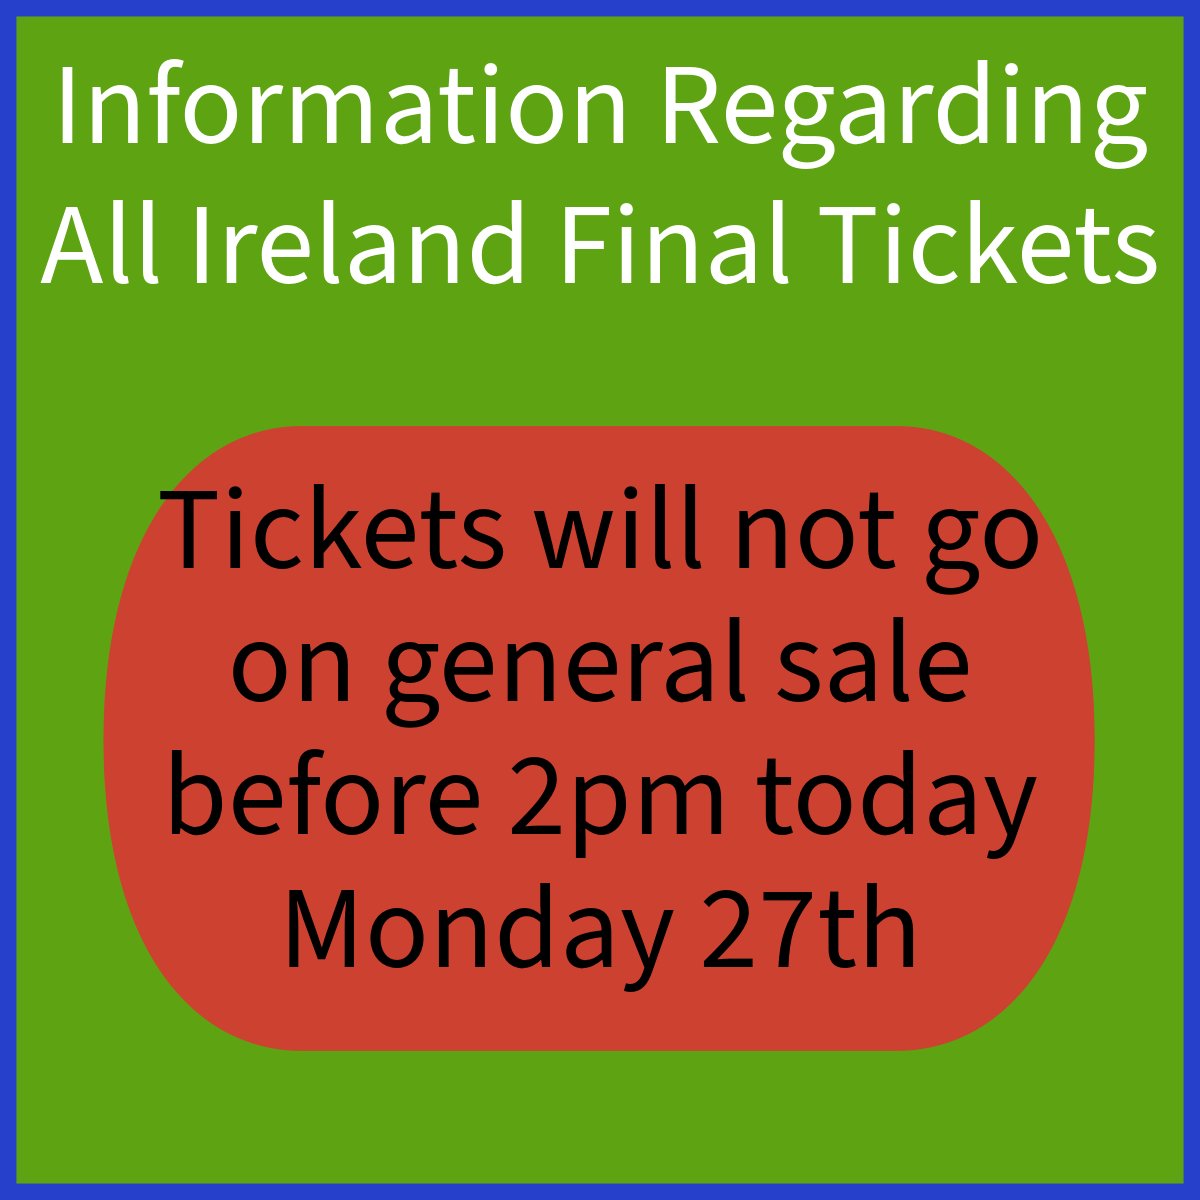 🅵🅾́🅶🆁🅰 Tickets for Saturday’s All Ireland Hurling Final will Not go on sale before 2pm today Monday 27th. We are in constant contact with Croke Park officials regarding the release of tickets and as soon as we get ticket links, they will be posted on our social media